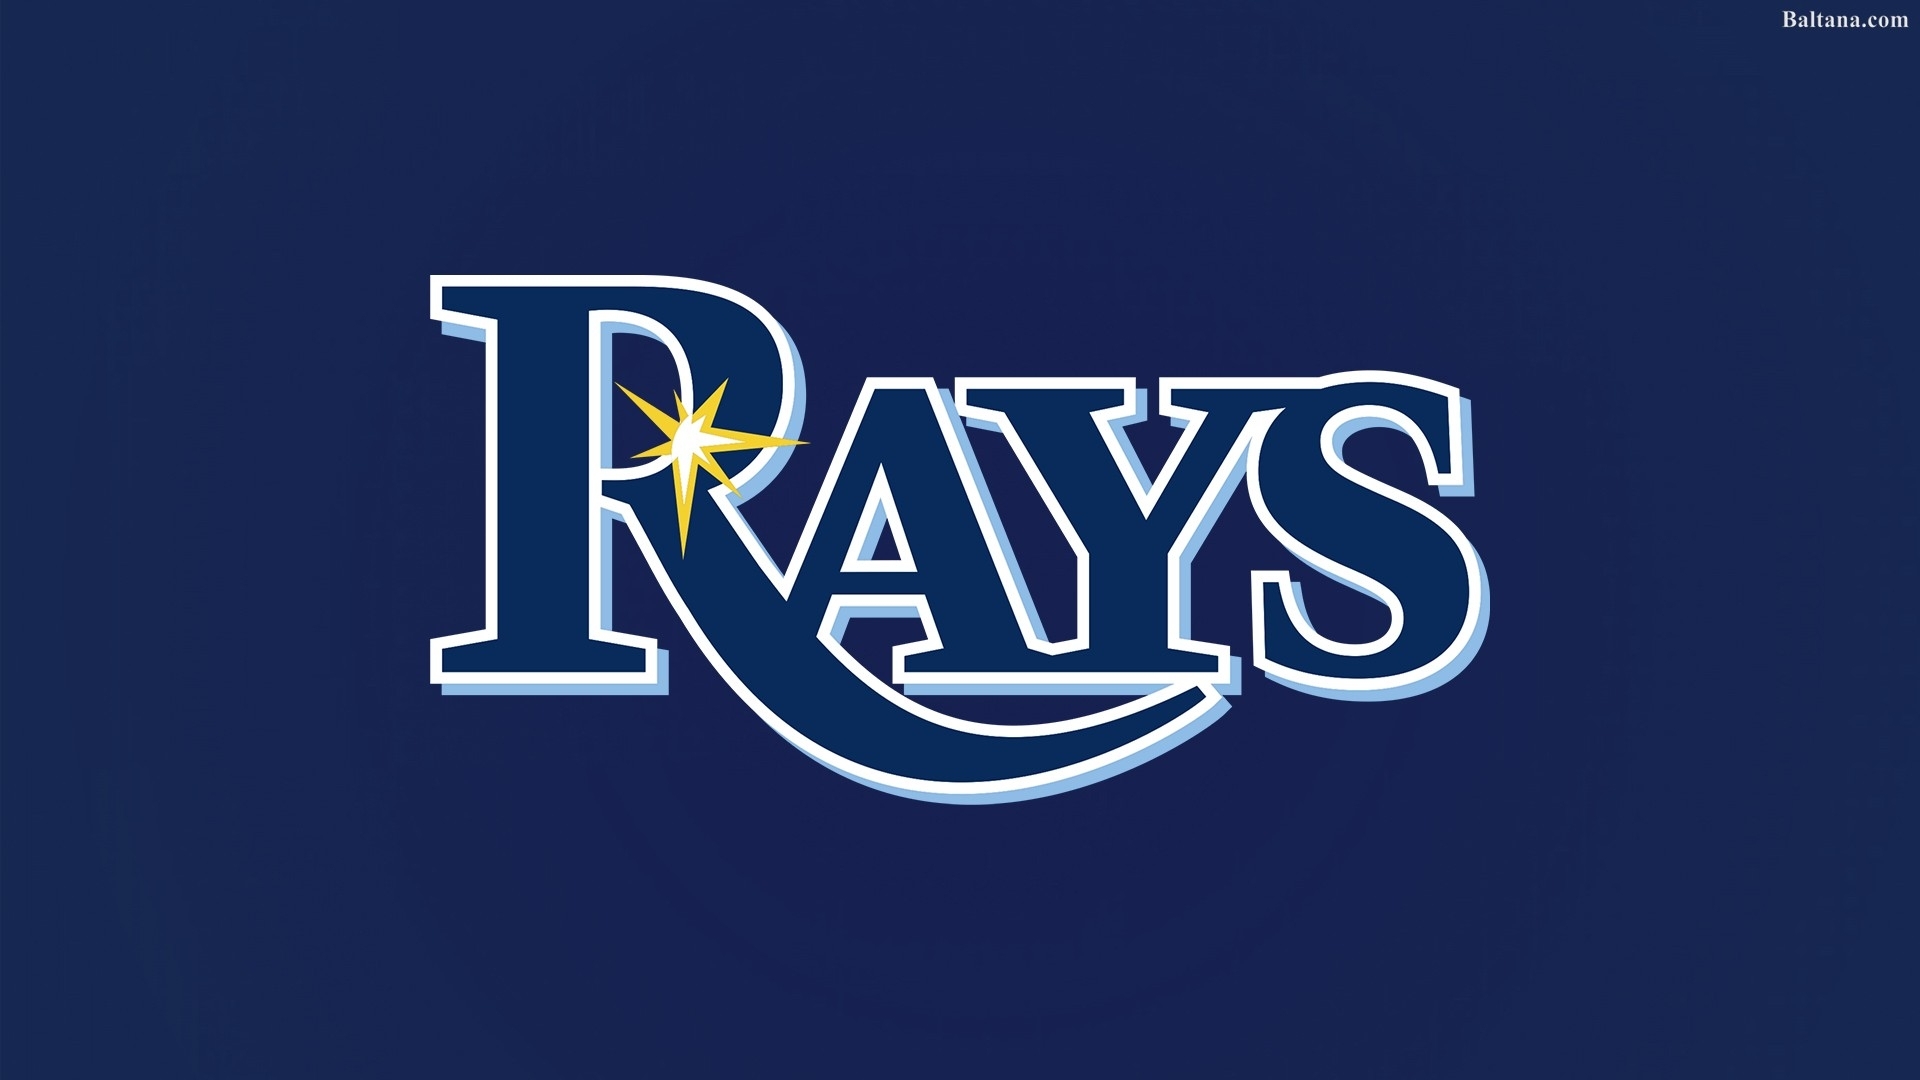 10 Latest Tampa Bay Rays Wallpaper FULL HD 1920×1080 For